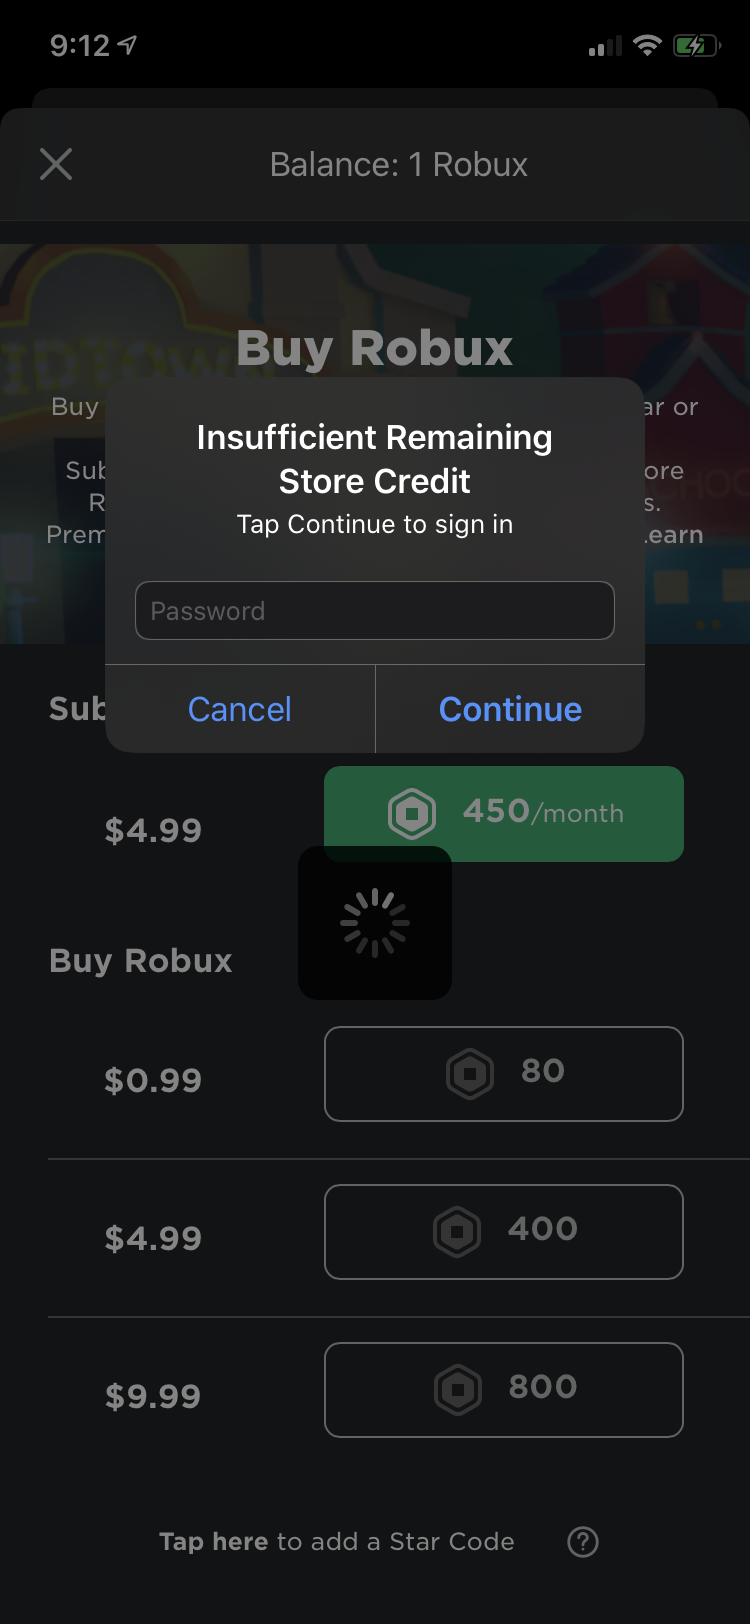 Insufficient Funds Itunes Apple Community - how to buy robux with itunes giftcard